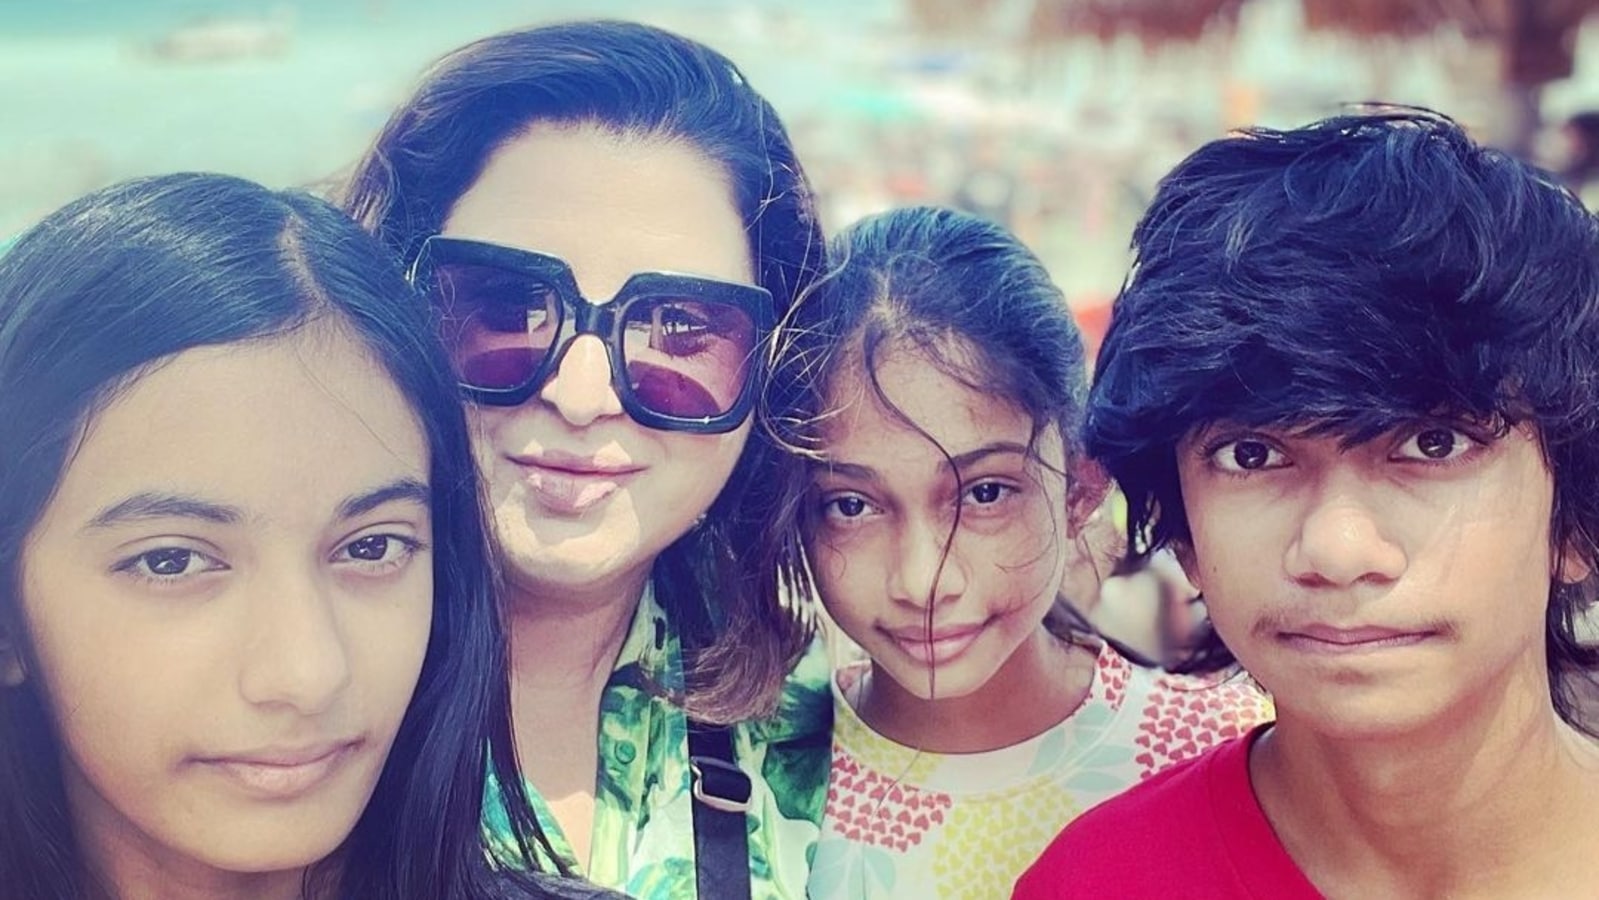 Farah Khan shares pictures from Thailand trip, says she struggled with getting her ‘triplets to pose’. See pics